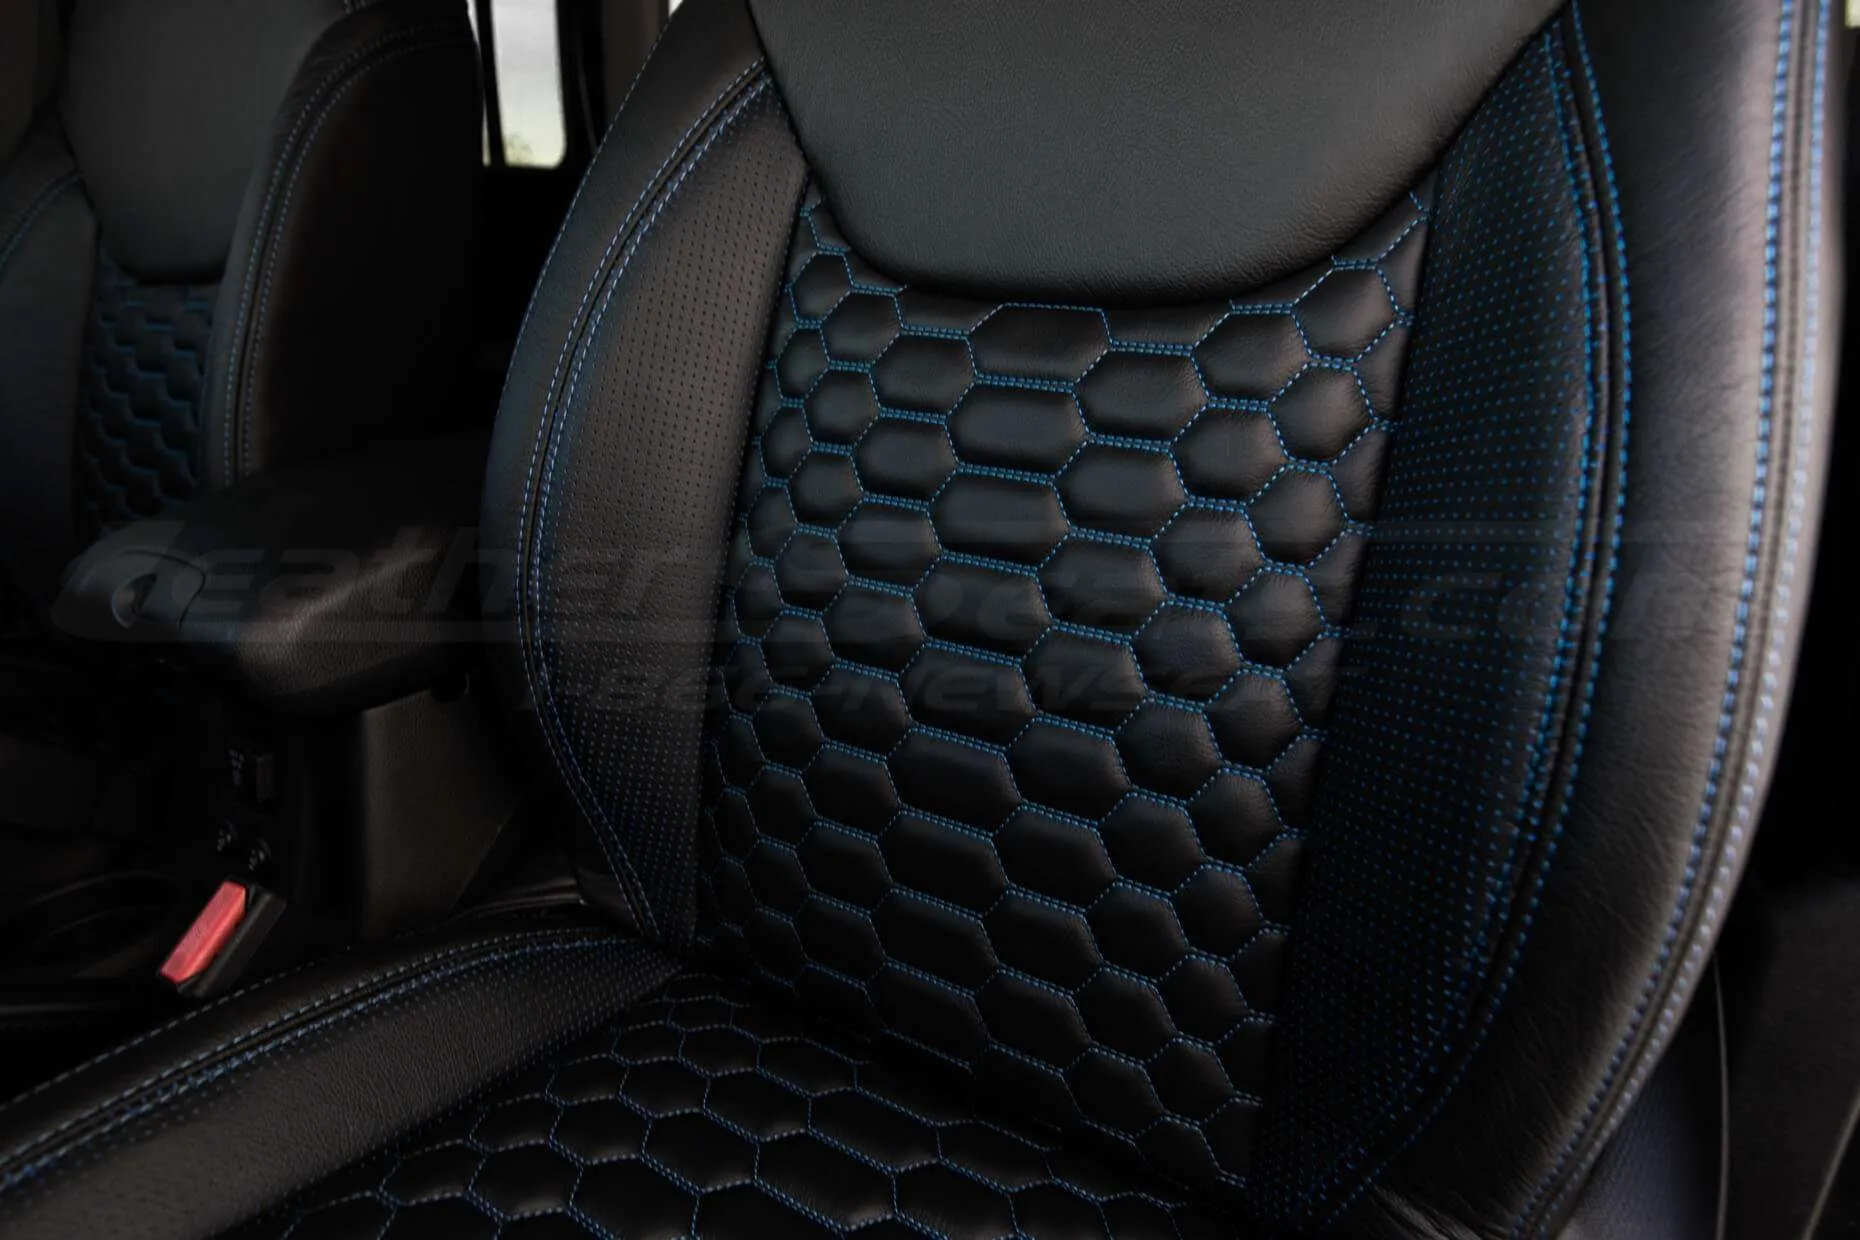 2013-2018 Jeep Wrangler Bespoked Leather Seats Installed- Black & Cobalt - Reticulated Hex backrest insert